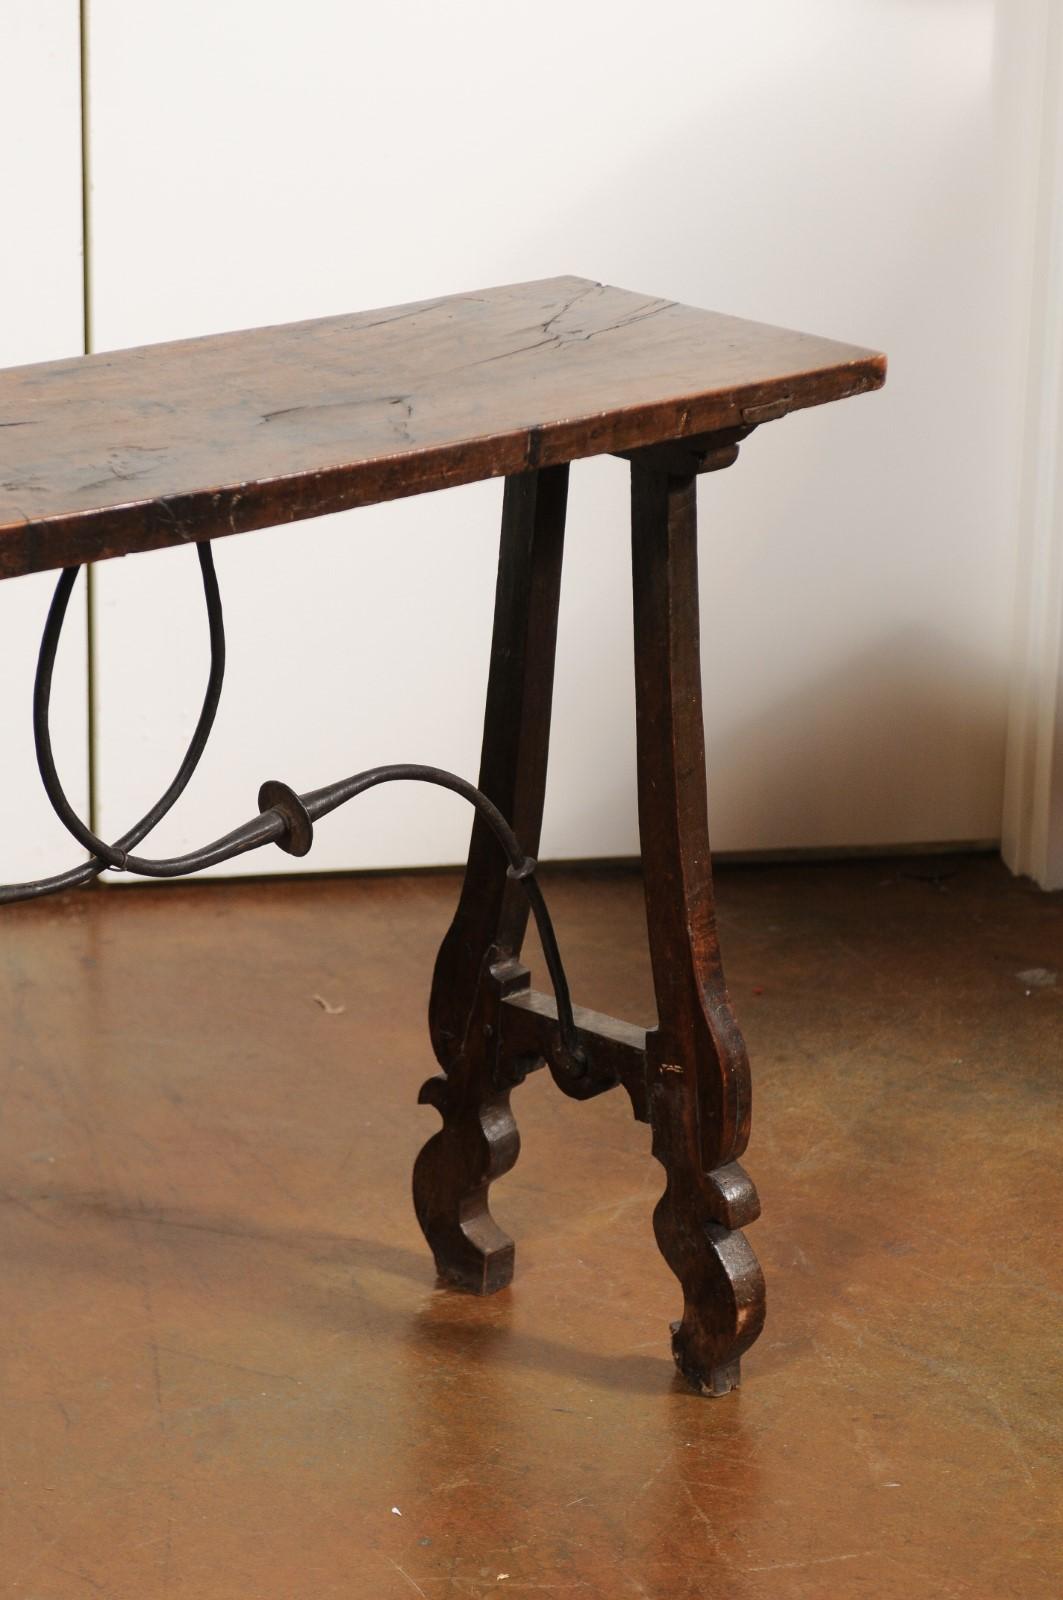 French 19th Century Baroque Walnut Console Table with Lyre Legs and Stretcher (Geschnitzt)